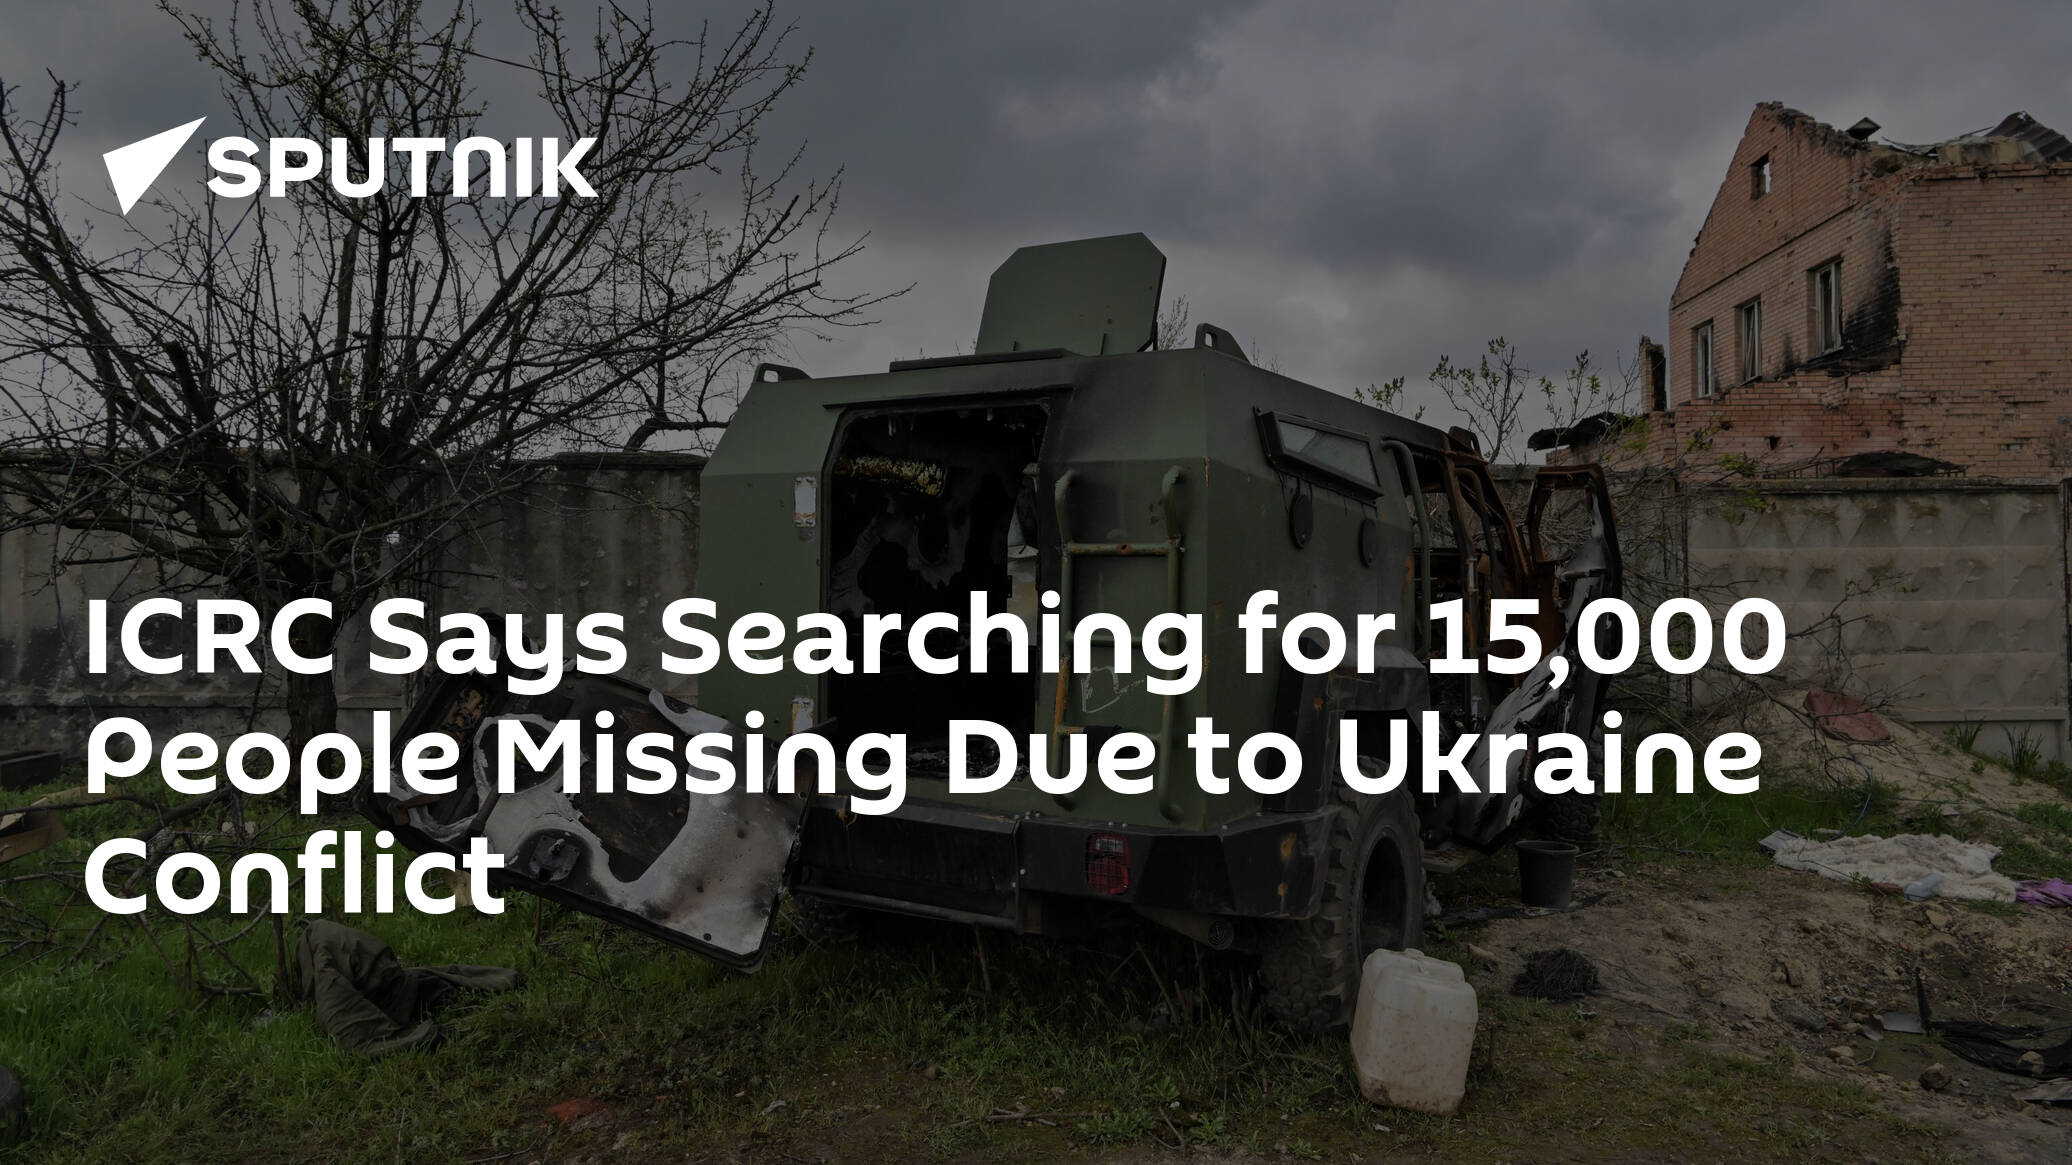 ICRC Says Searching for 15,000 People Missing Due to Ukraine Conflict